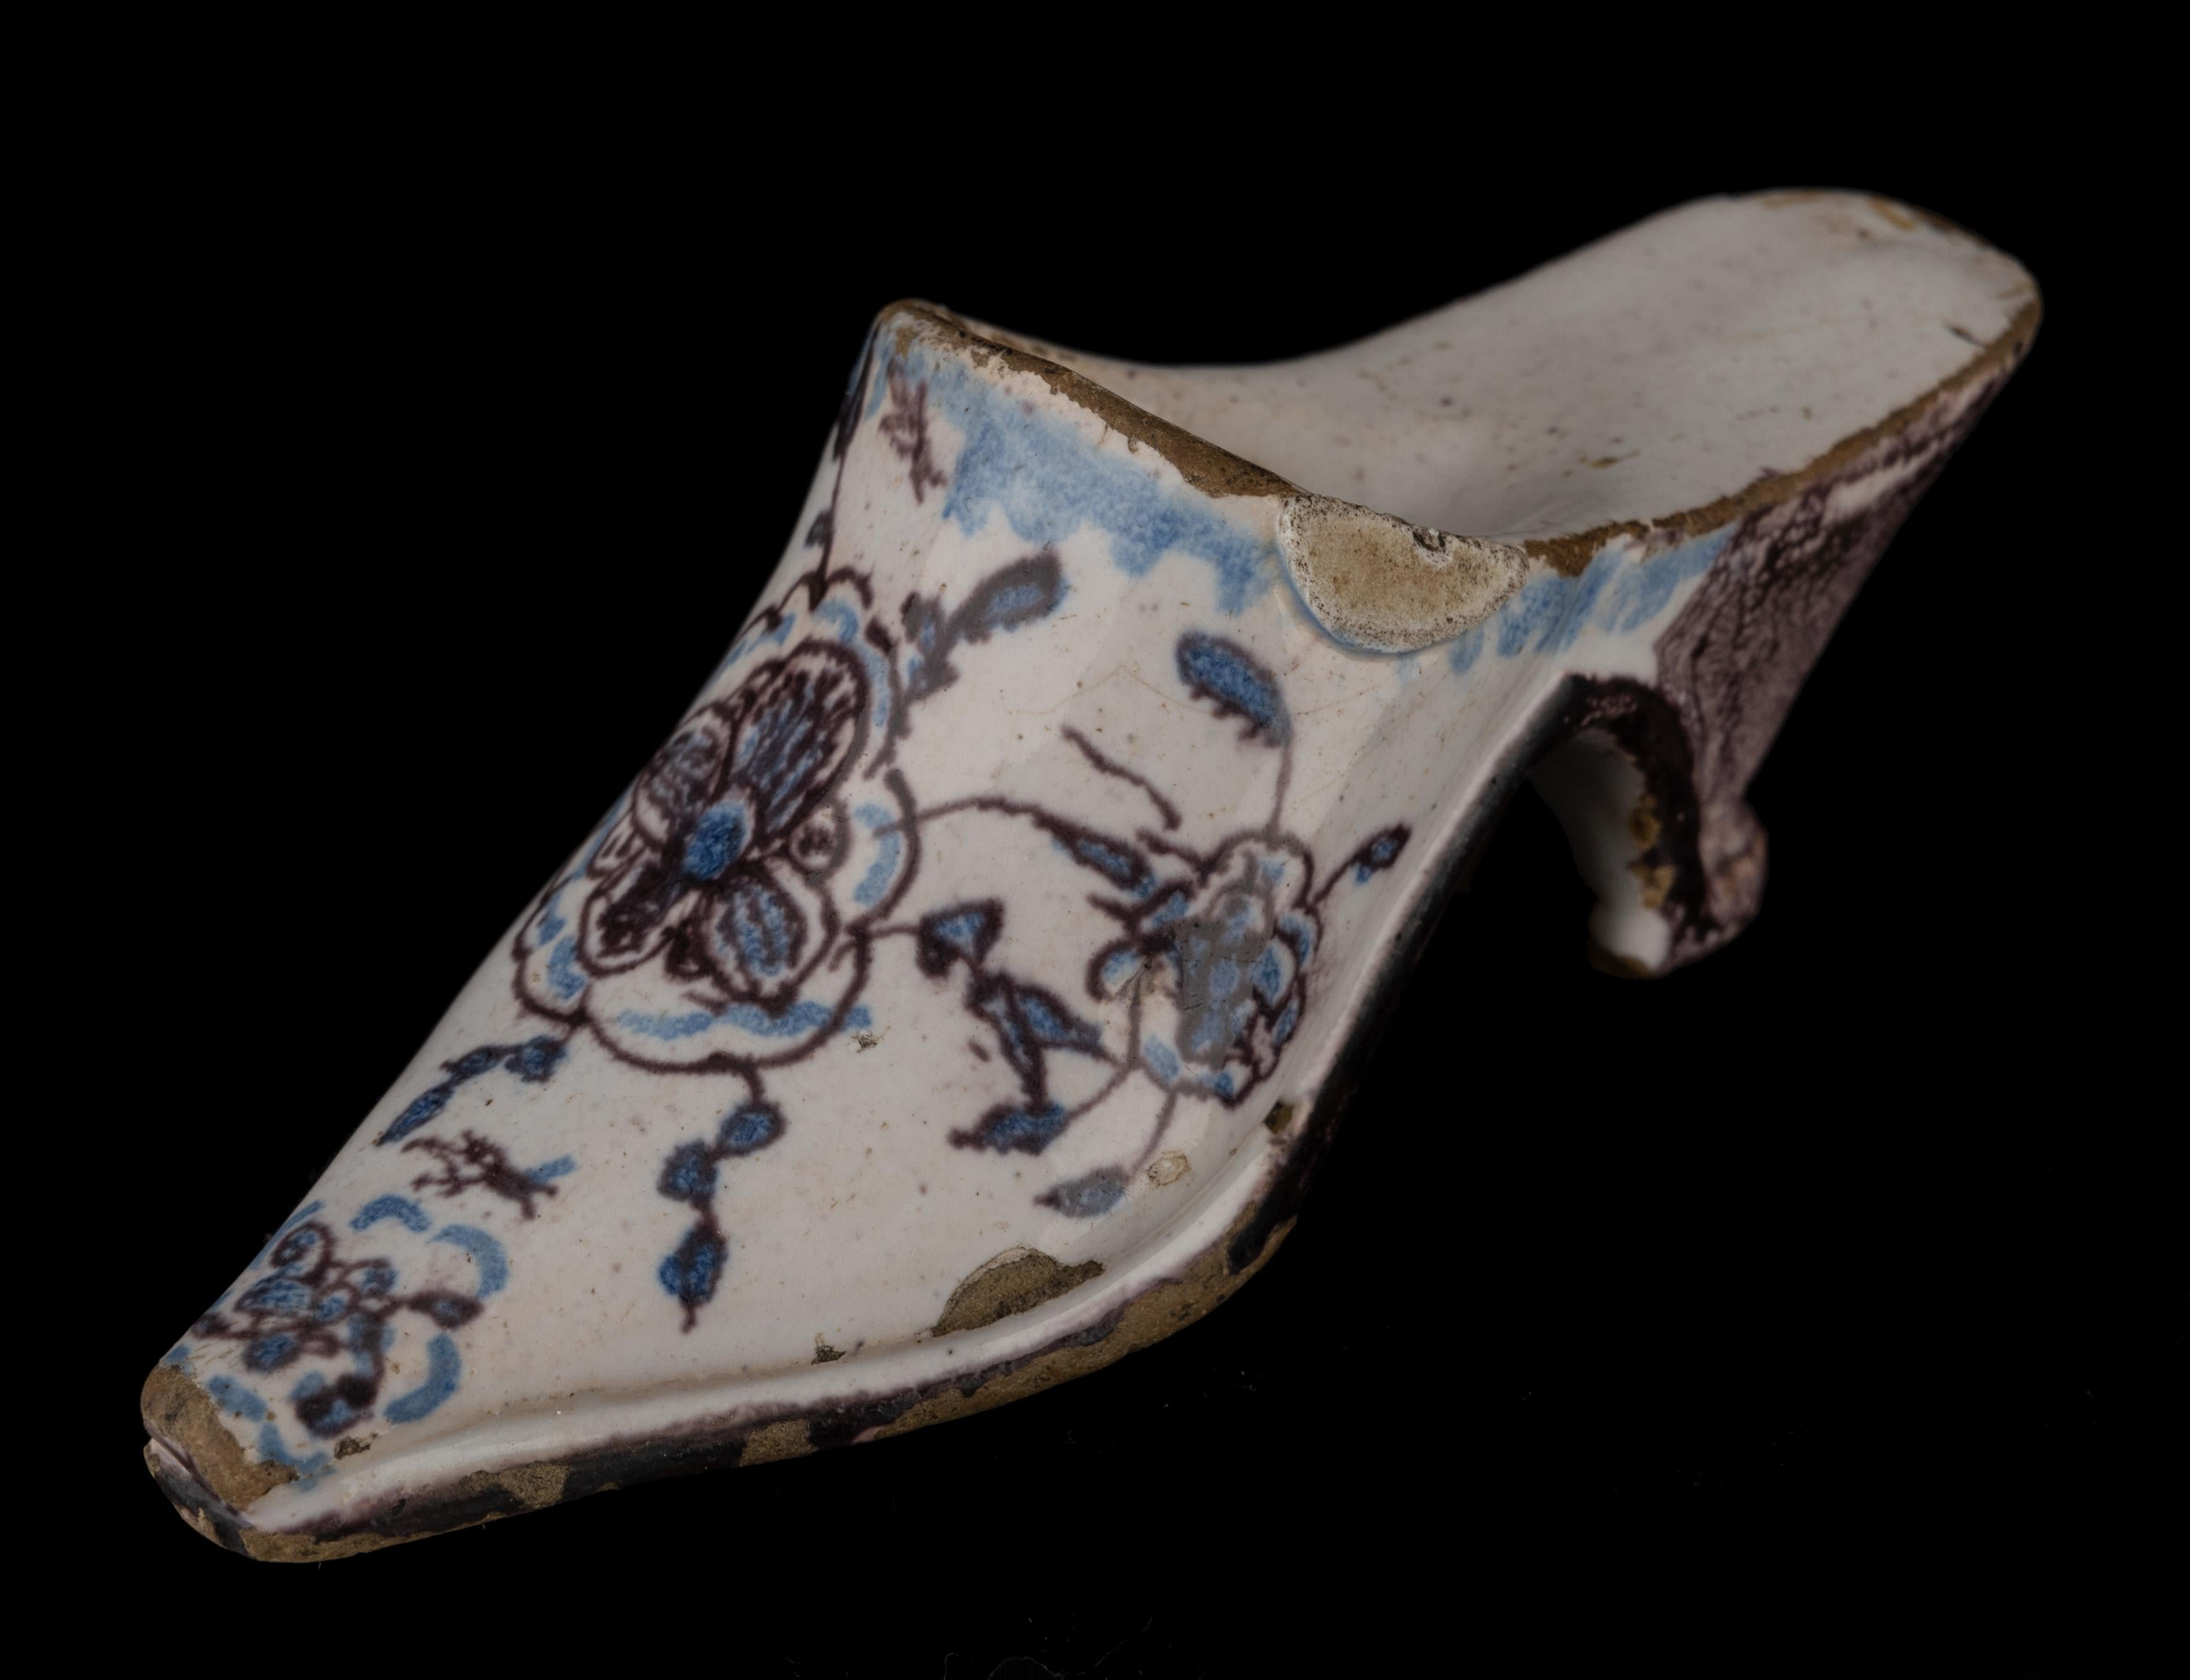 Mule with flowers in purple and blue Amsterdam, 1740-1760
The mule has a pointed nose and a high vamp. It is painted in blue and purple with flowers. A band with dots is applied in blue just below the edge of the shaft. The heel and sole are in